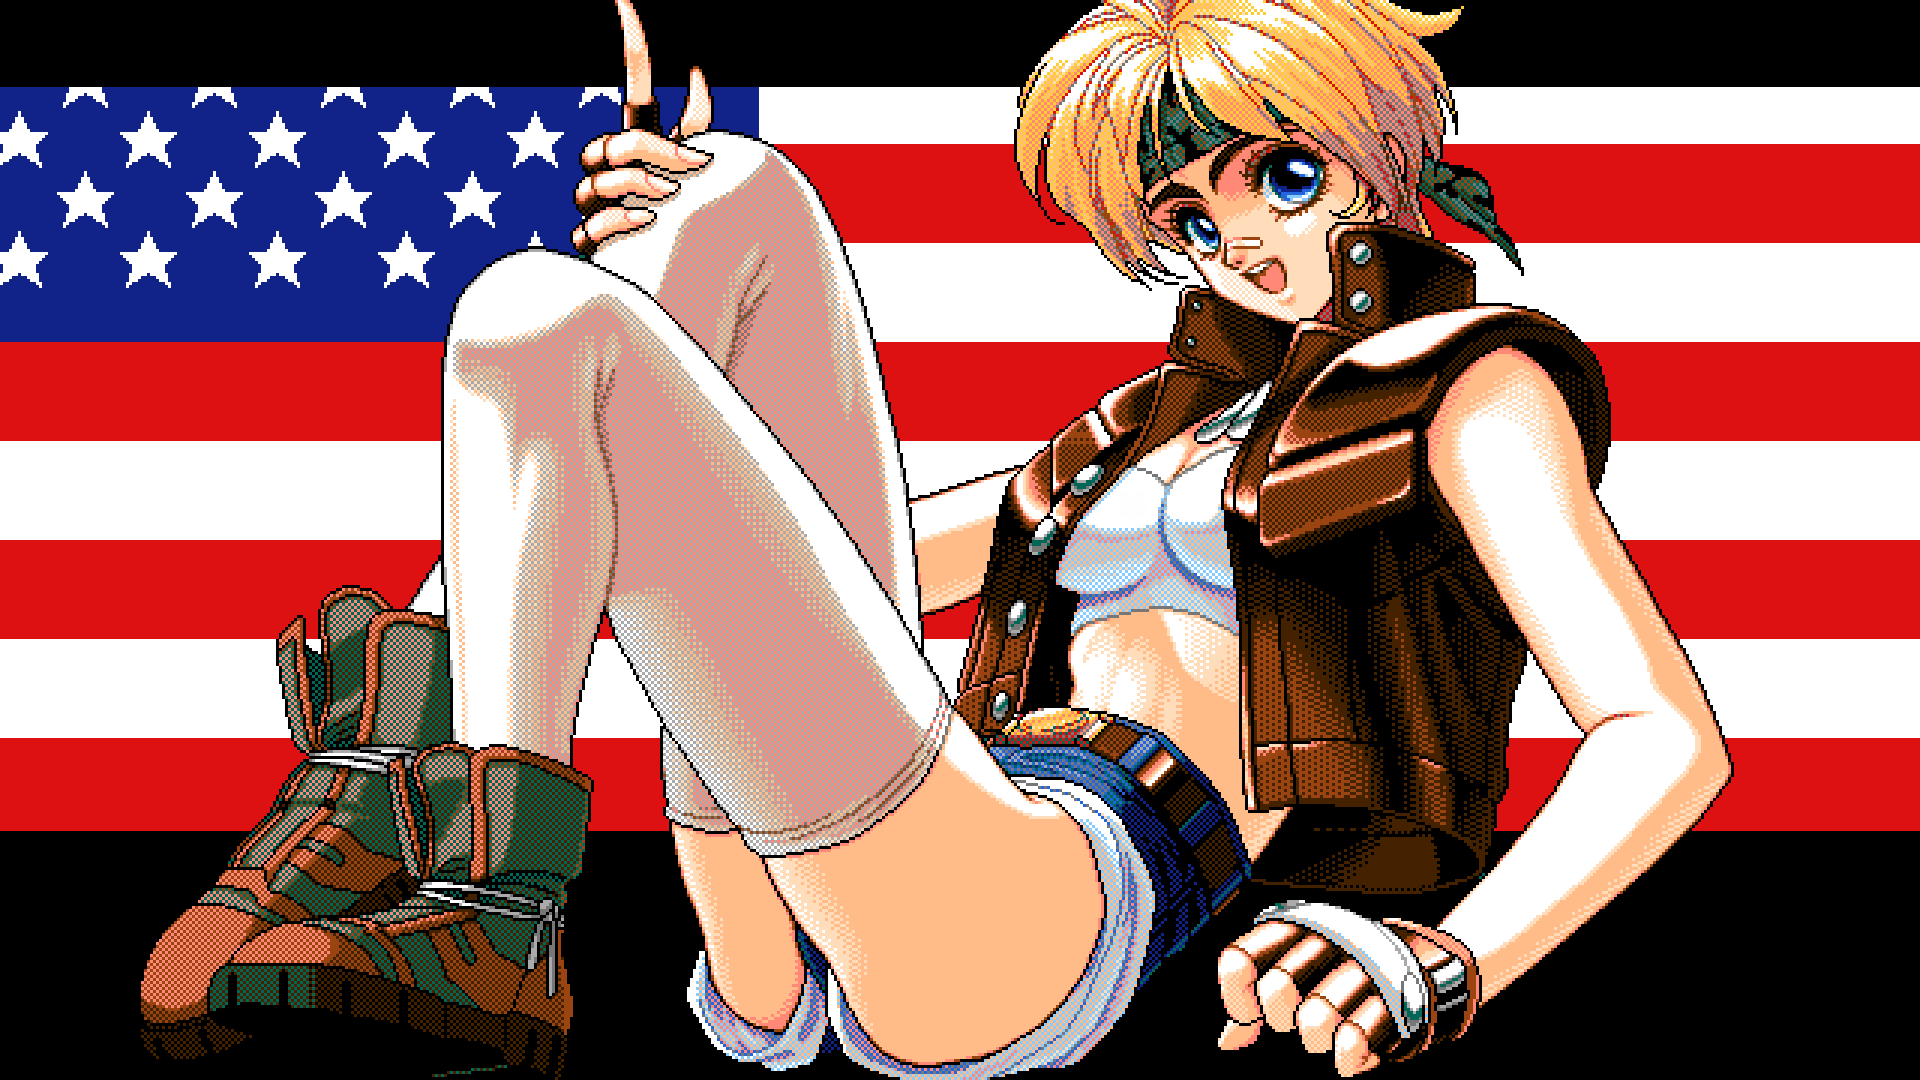 Anime 1920x1080 pixel art Game CG anime girls PC-98 digital art American flag gloves fingerless gloves band-aid flag headband stockings shorts boots looking at viewer jacket